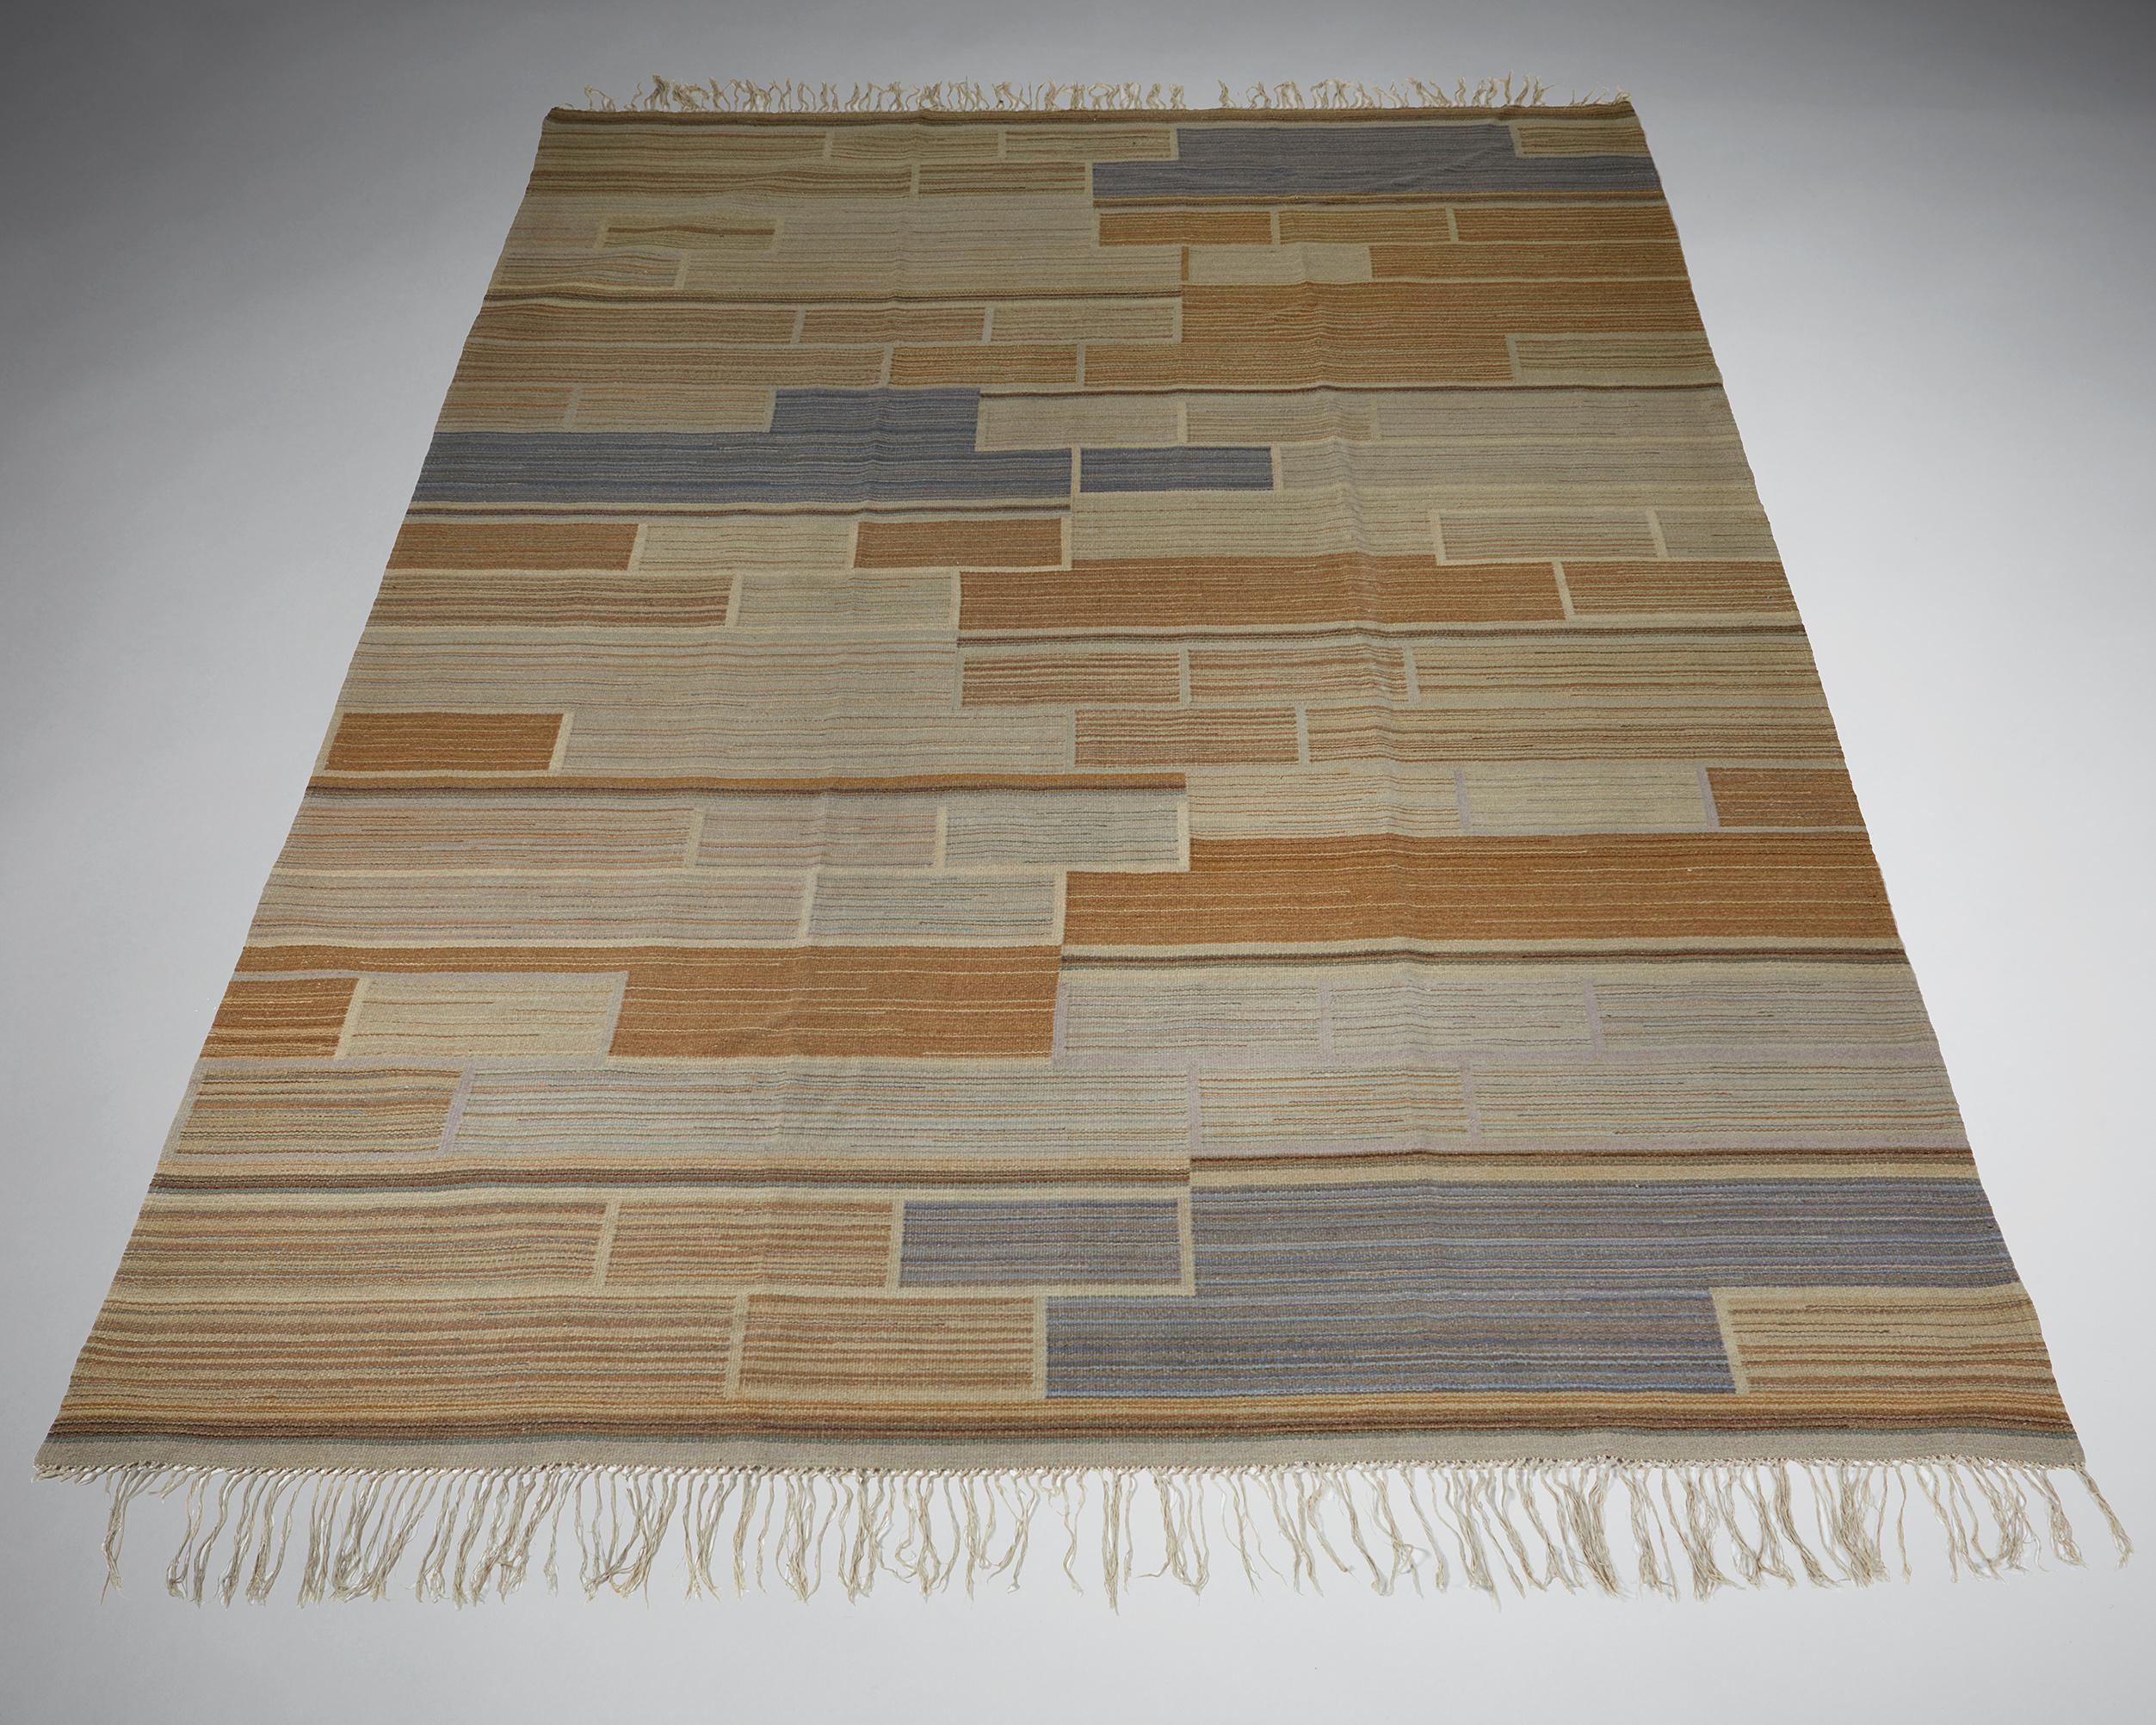 Rug designed by Greta Skogster-Lehtinen for Aaltosen Mattokutomo,
Finland, 1930s.

Flat weave.

Crafted in Finland by Aaltosen Mattokutomo in the 1930’s, Greta Skogster-Lehtinen designed this for the office of the Chancellor of the Finnish